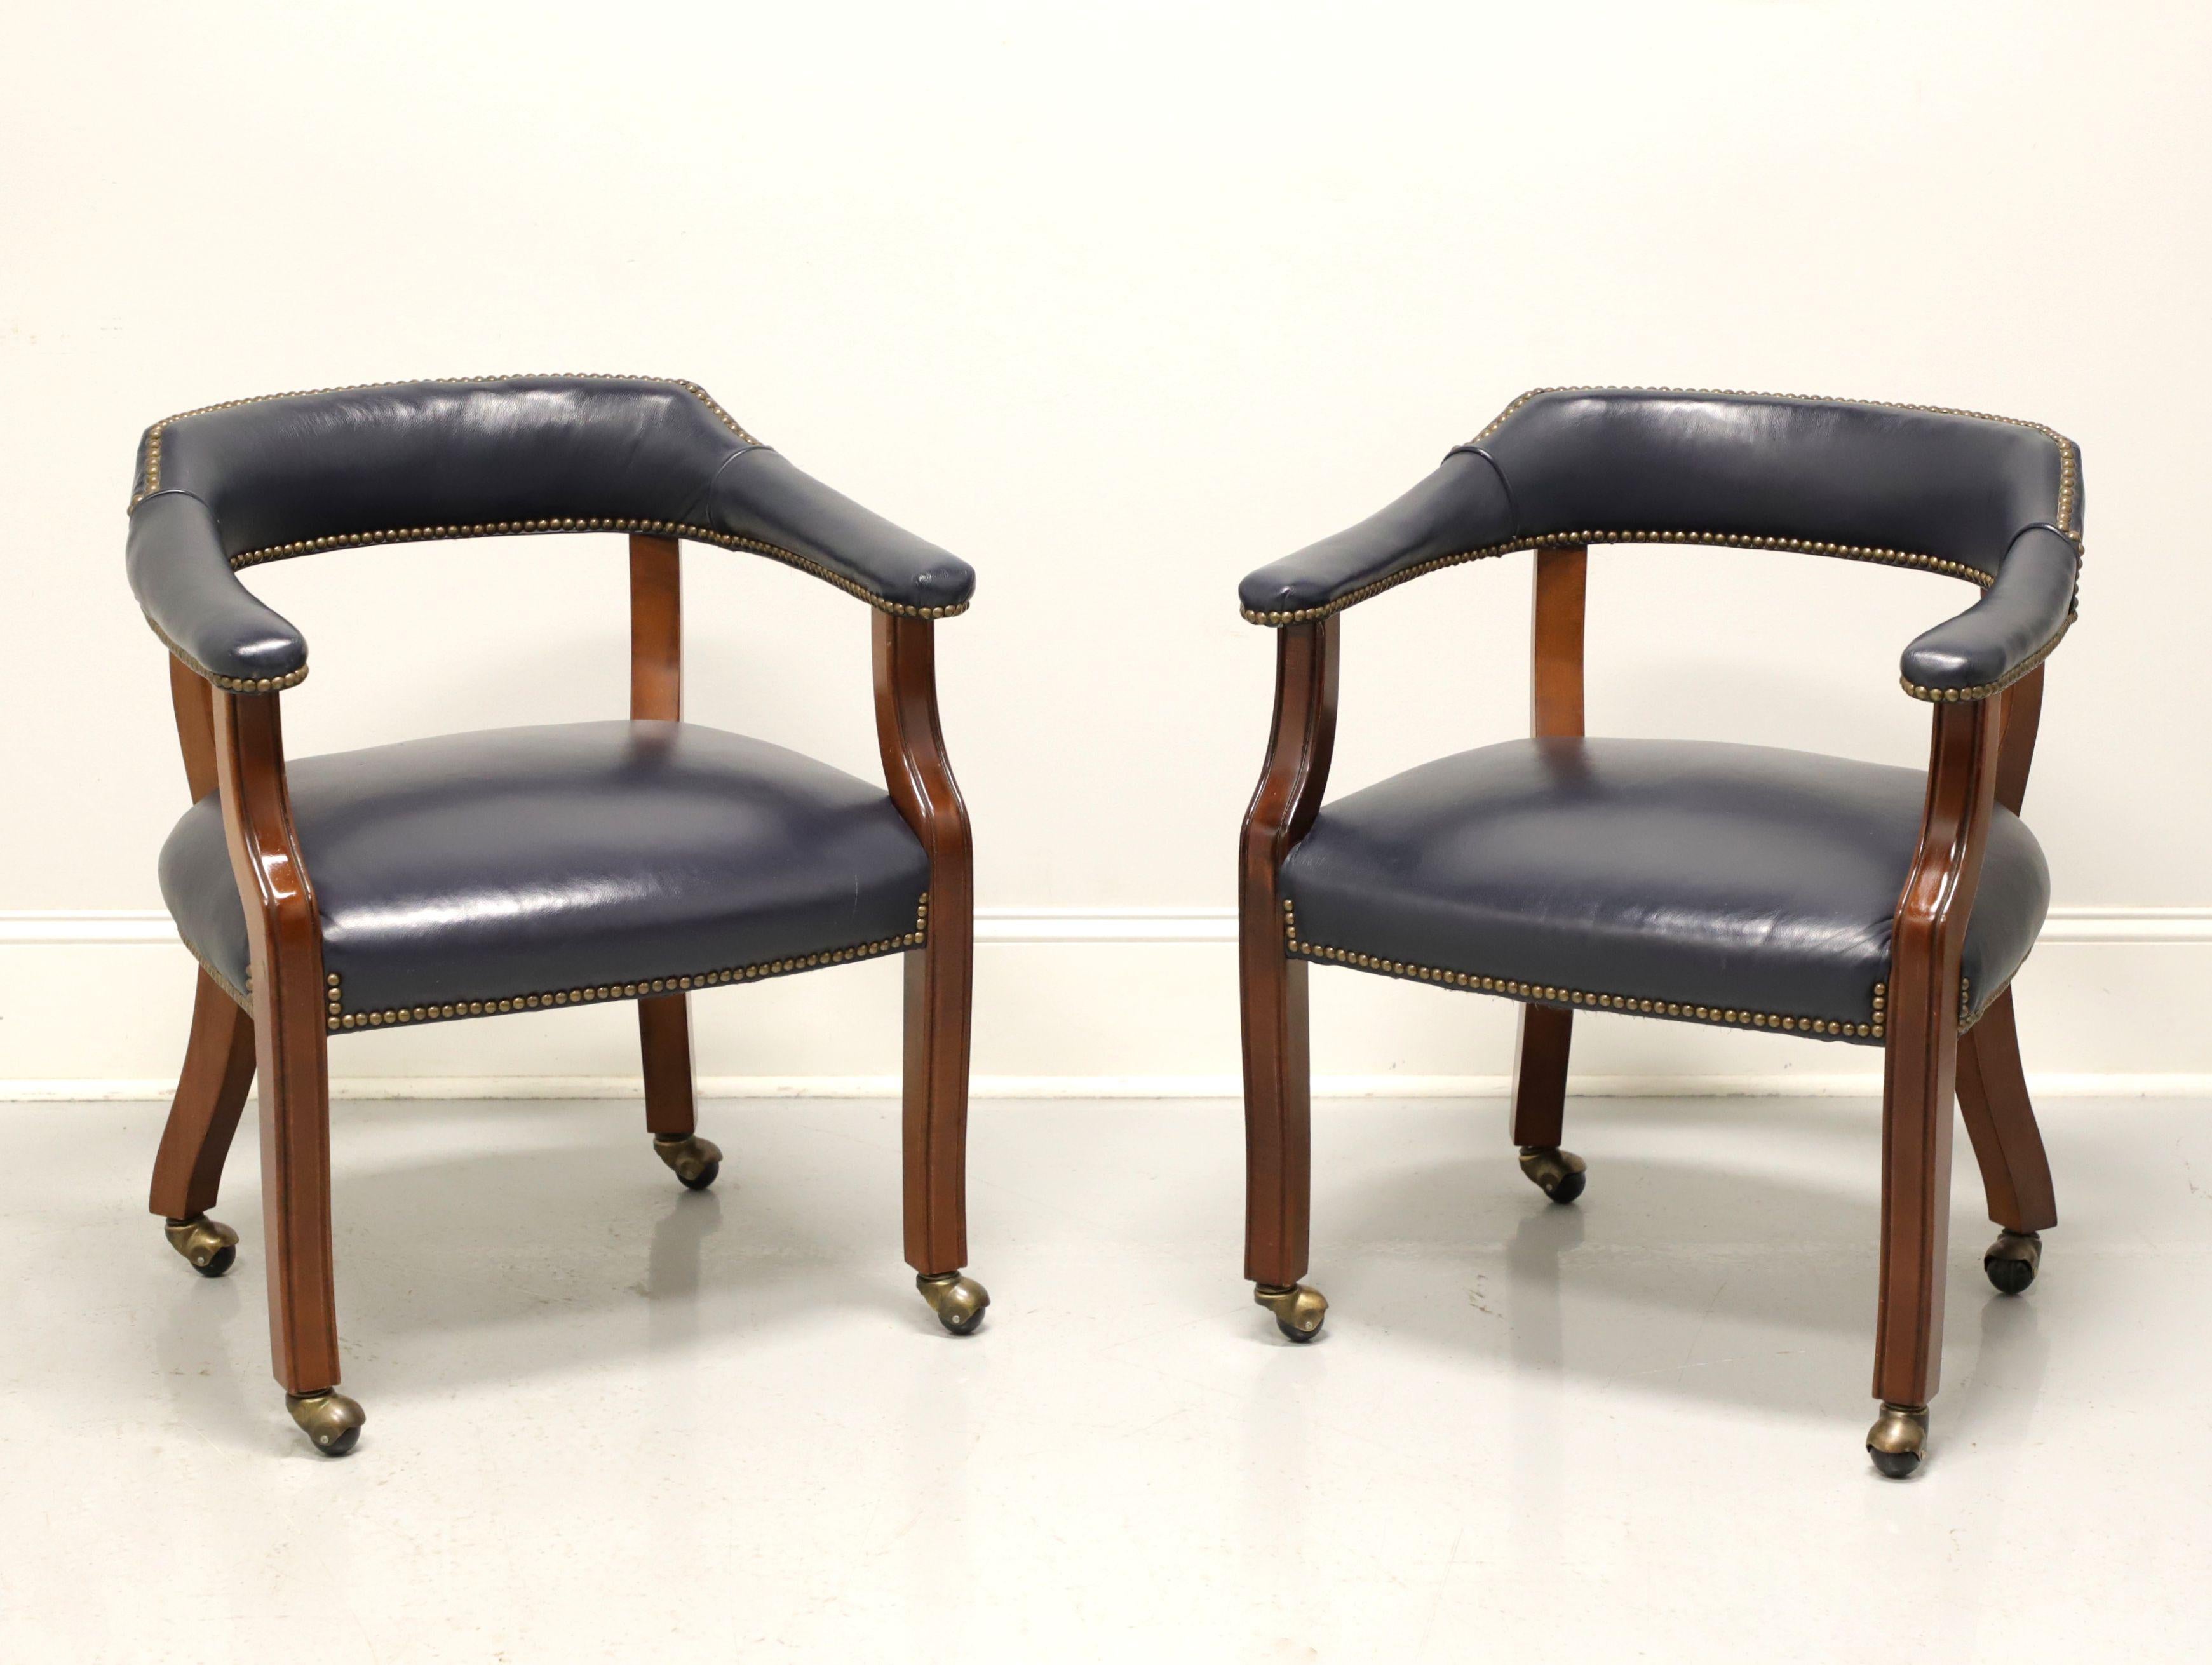 GORDON’S Late 20th Century Leather Club Chairs on Casters - Pair B 5